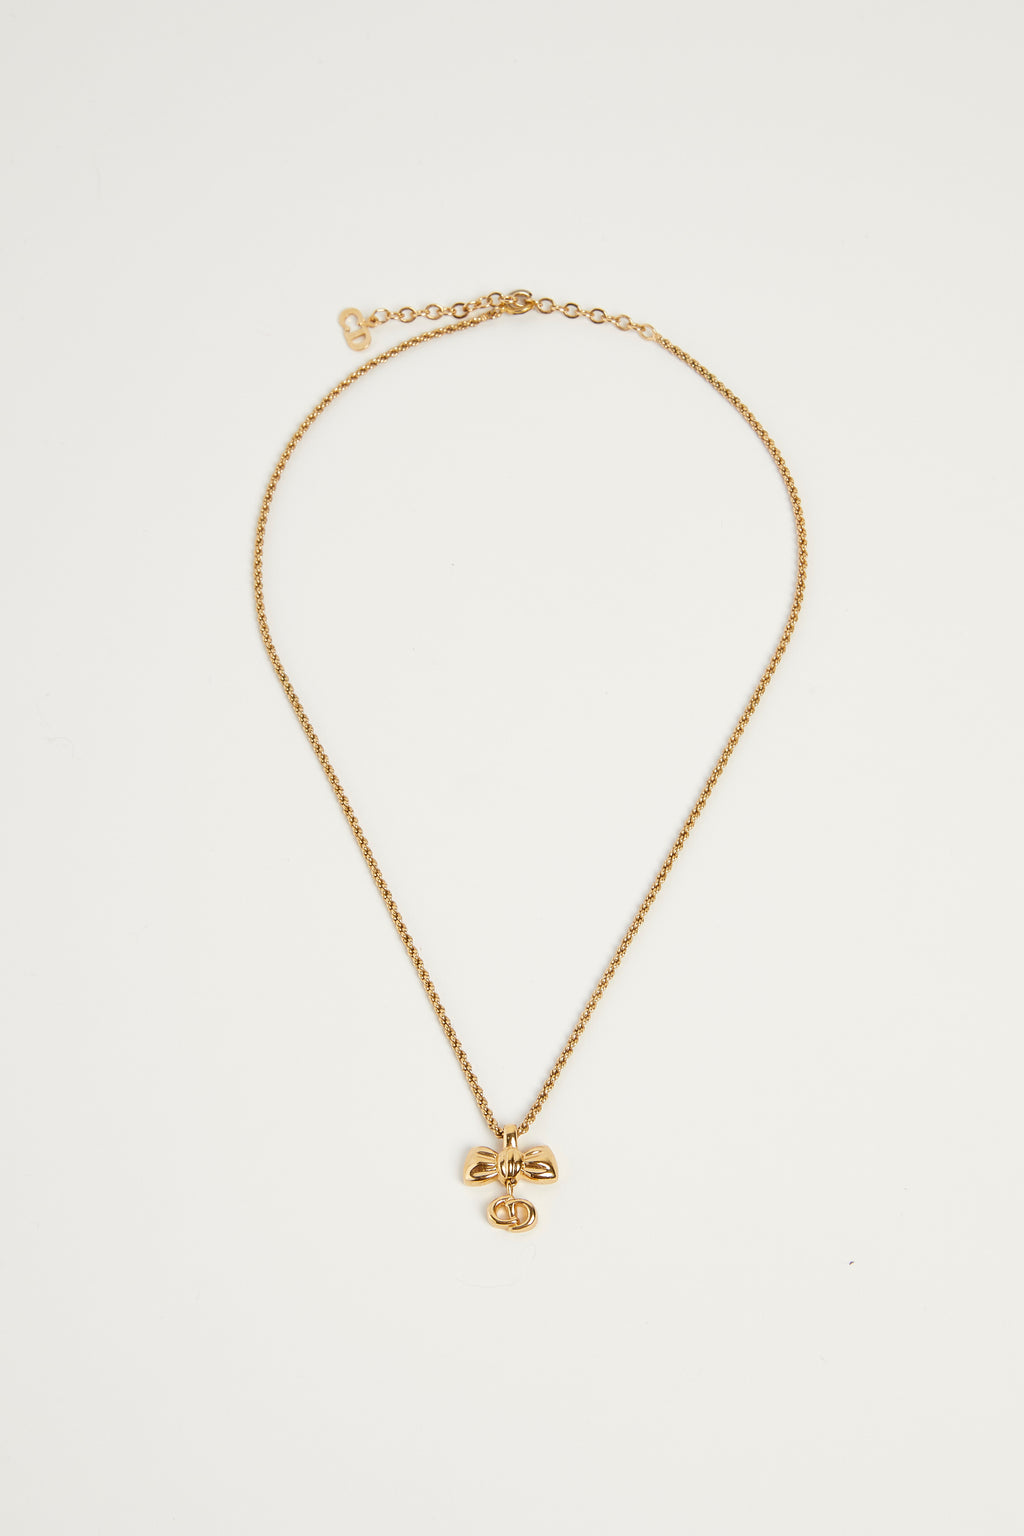 Vintage Christian Dior Gold Bow Necklace